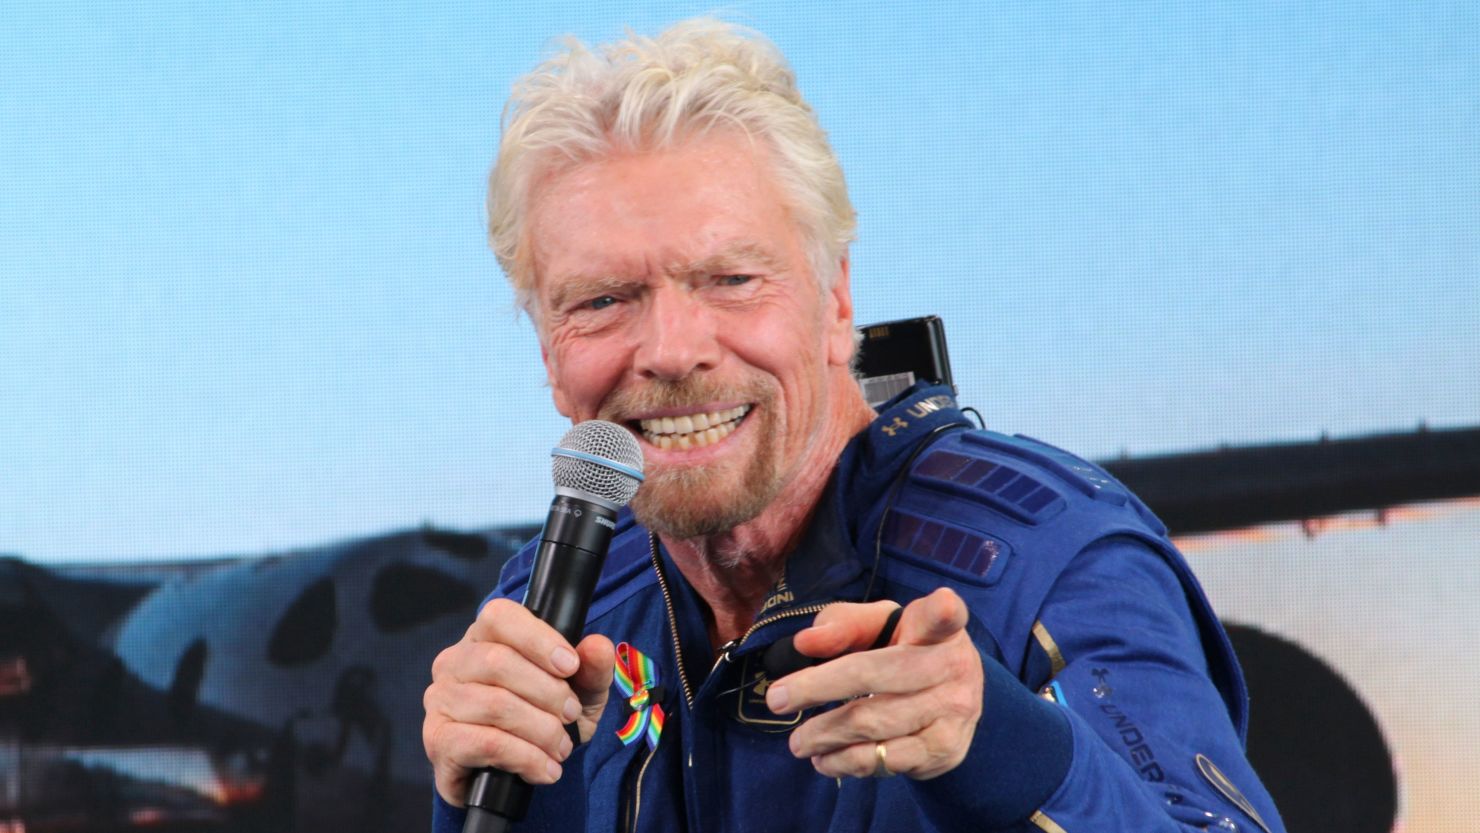 Richard Branson answers questions after successfully going to the edge of space